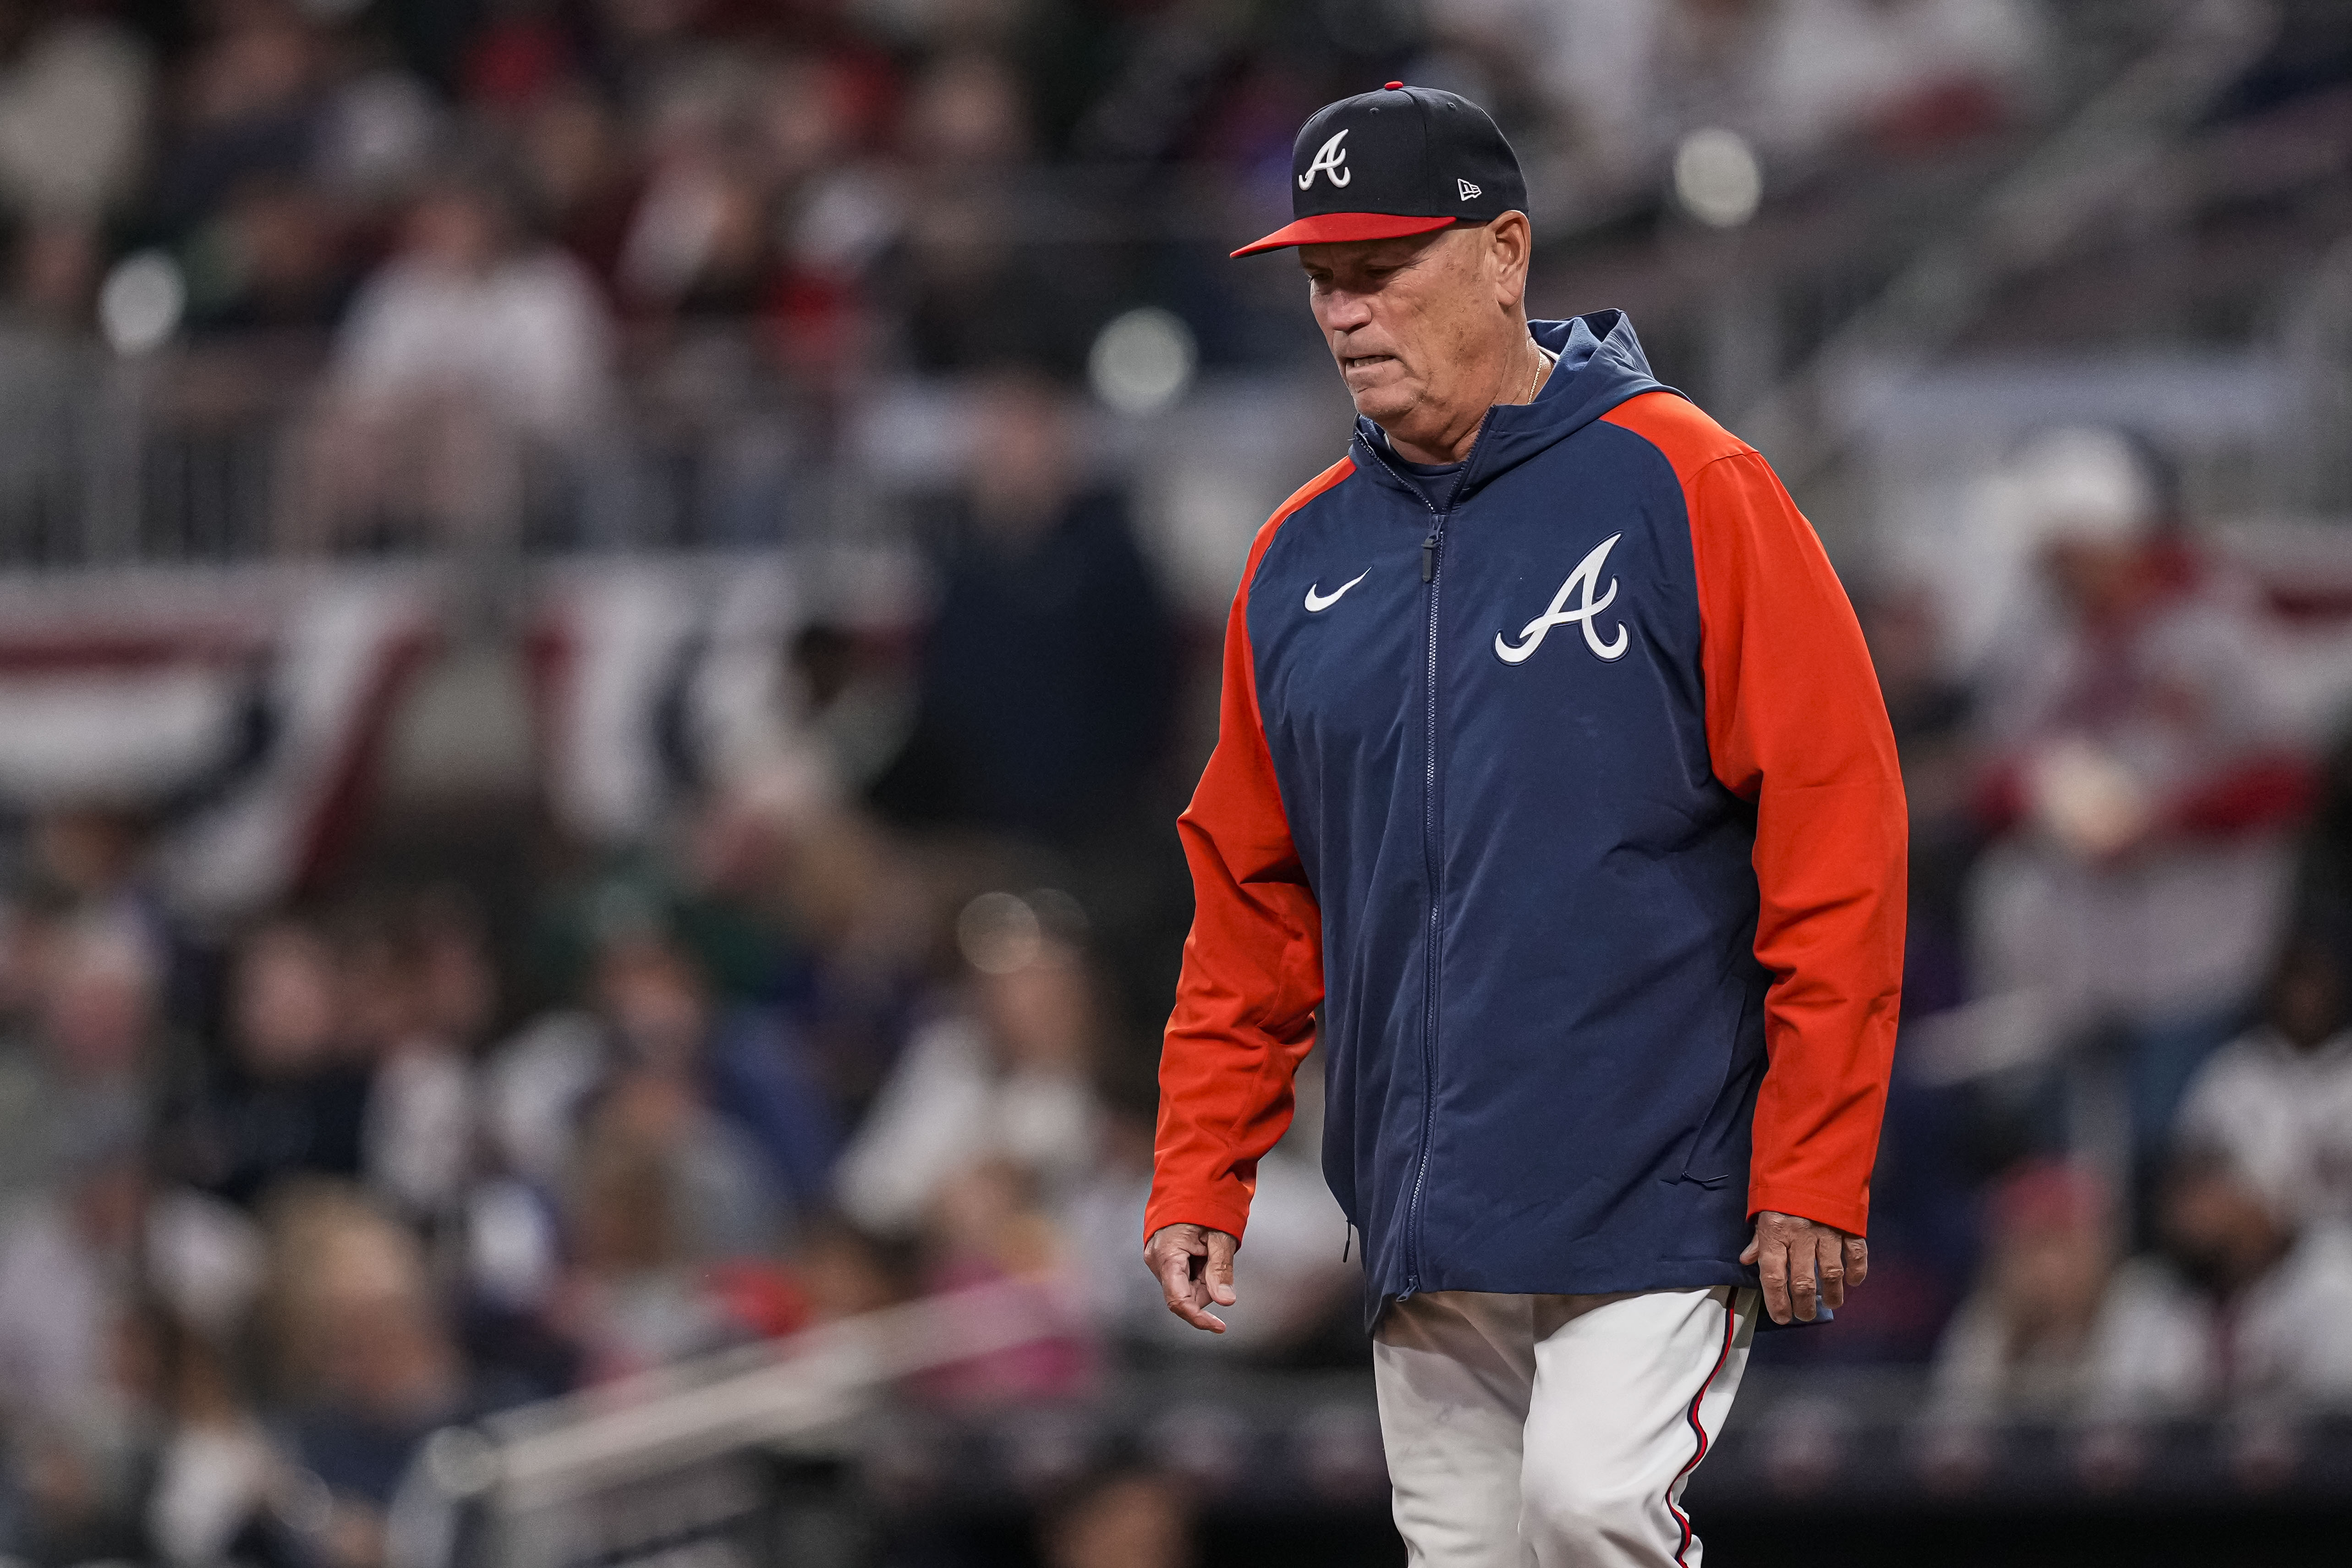 MLB fans shocked by Father's Day Celebration disaster for Atlanta Braves:  Sometimes baseball is a cruel business